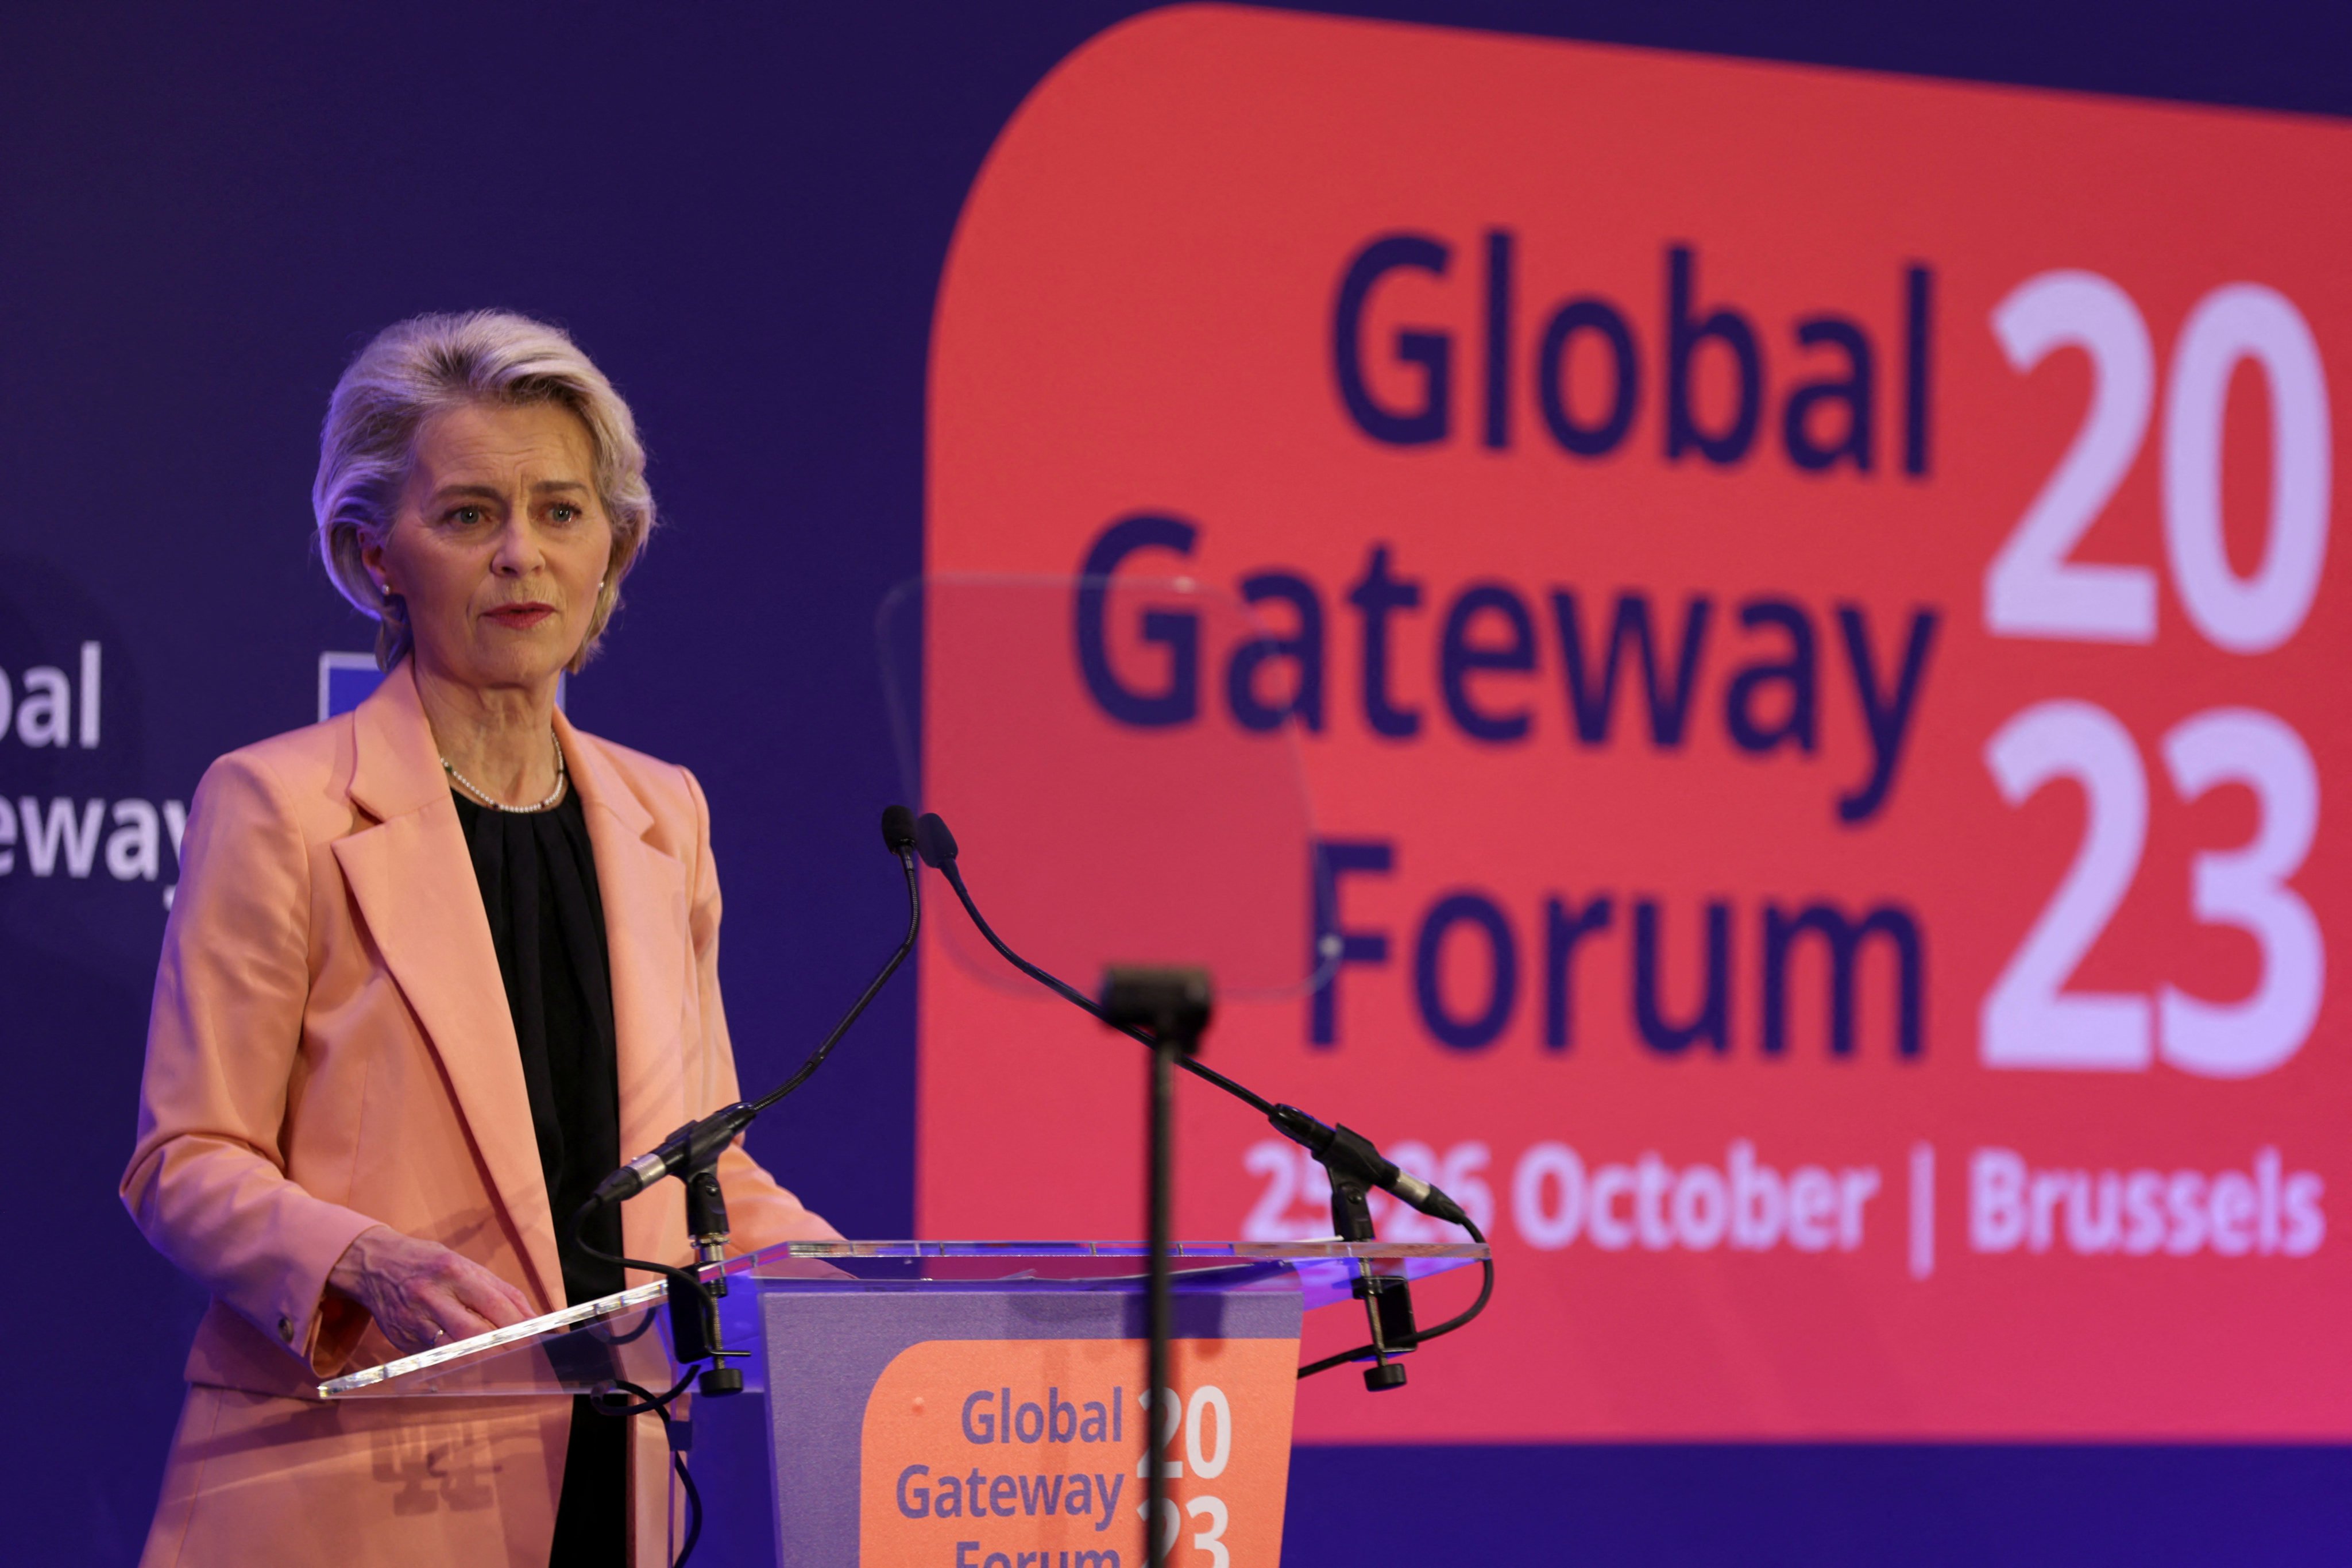 European Commission President Ursula von der Leyen addresses the Global Gateway Forum in Brussels on October 25. The Global Gateway project is the EU’s answer to China’s Belt and Road Initiative. Photo: Reuters